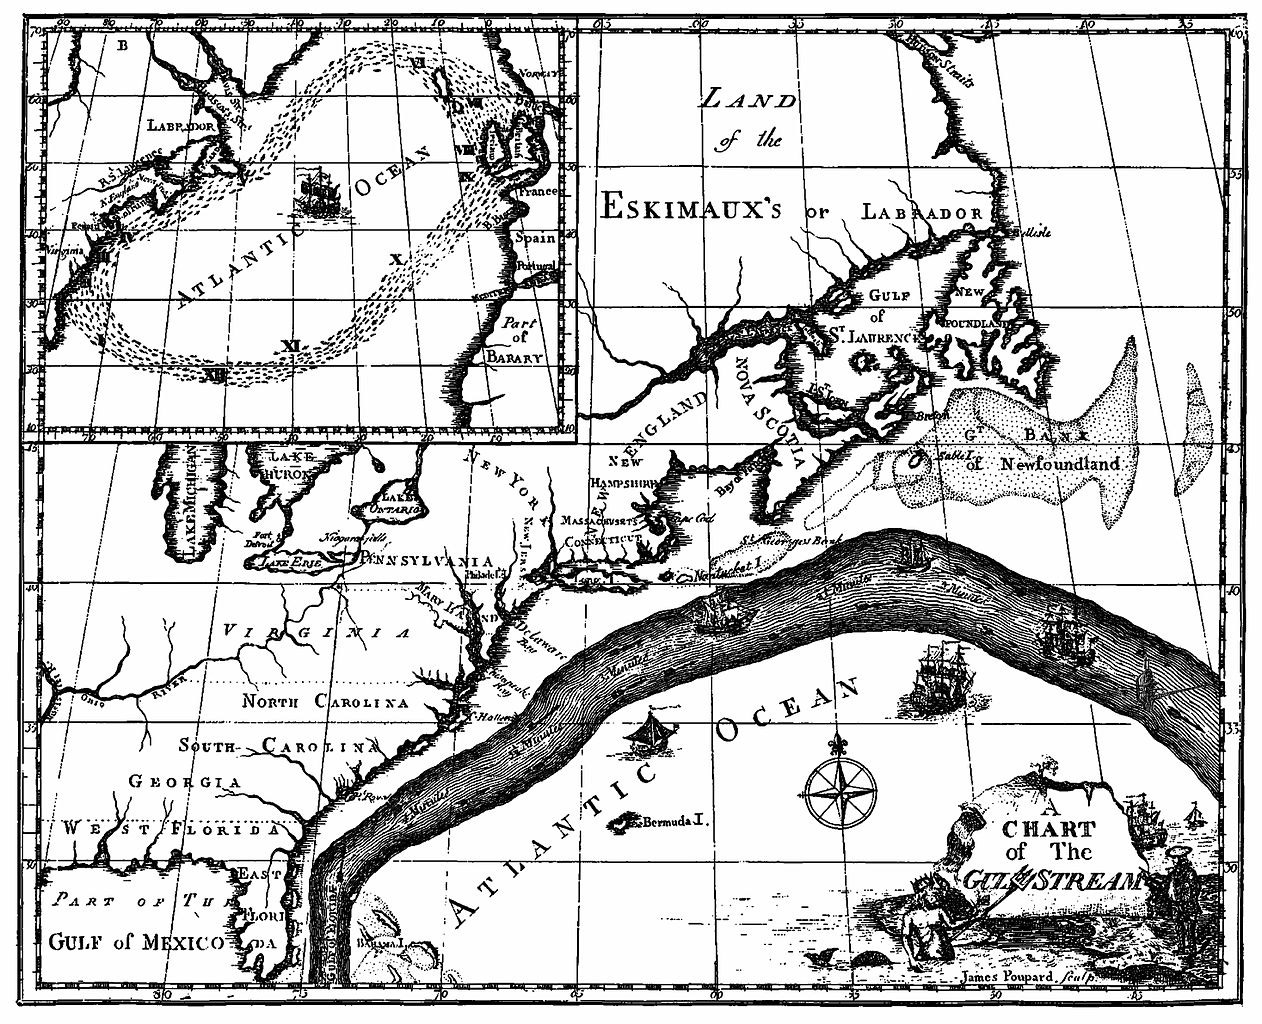 In 1769, Benjamin Franklin published this first scientific chart of the Gulf Stream, a fast-moving current that sweeps up from Florida, then along the East Coast and across the Atlantic to Europe.

Franklin called it “a river in the ocean,” and predicted that staying in this current could speed mail delivery to Europe and shave valuable time off long and often treacherous shipping routes. He produced this chart showing a darkened Gulf Stream, opening the potential to nearly double travel speed.